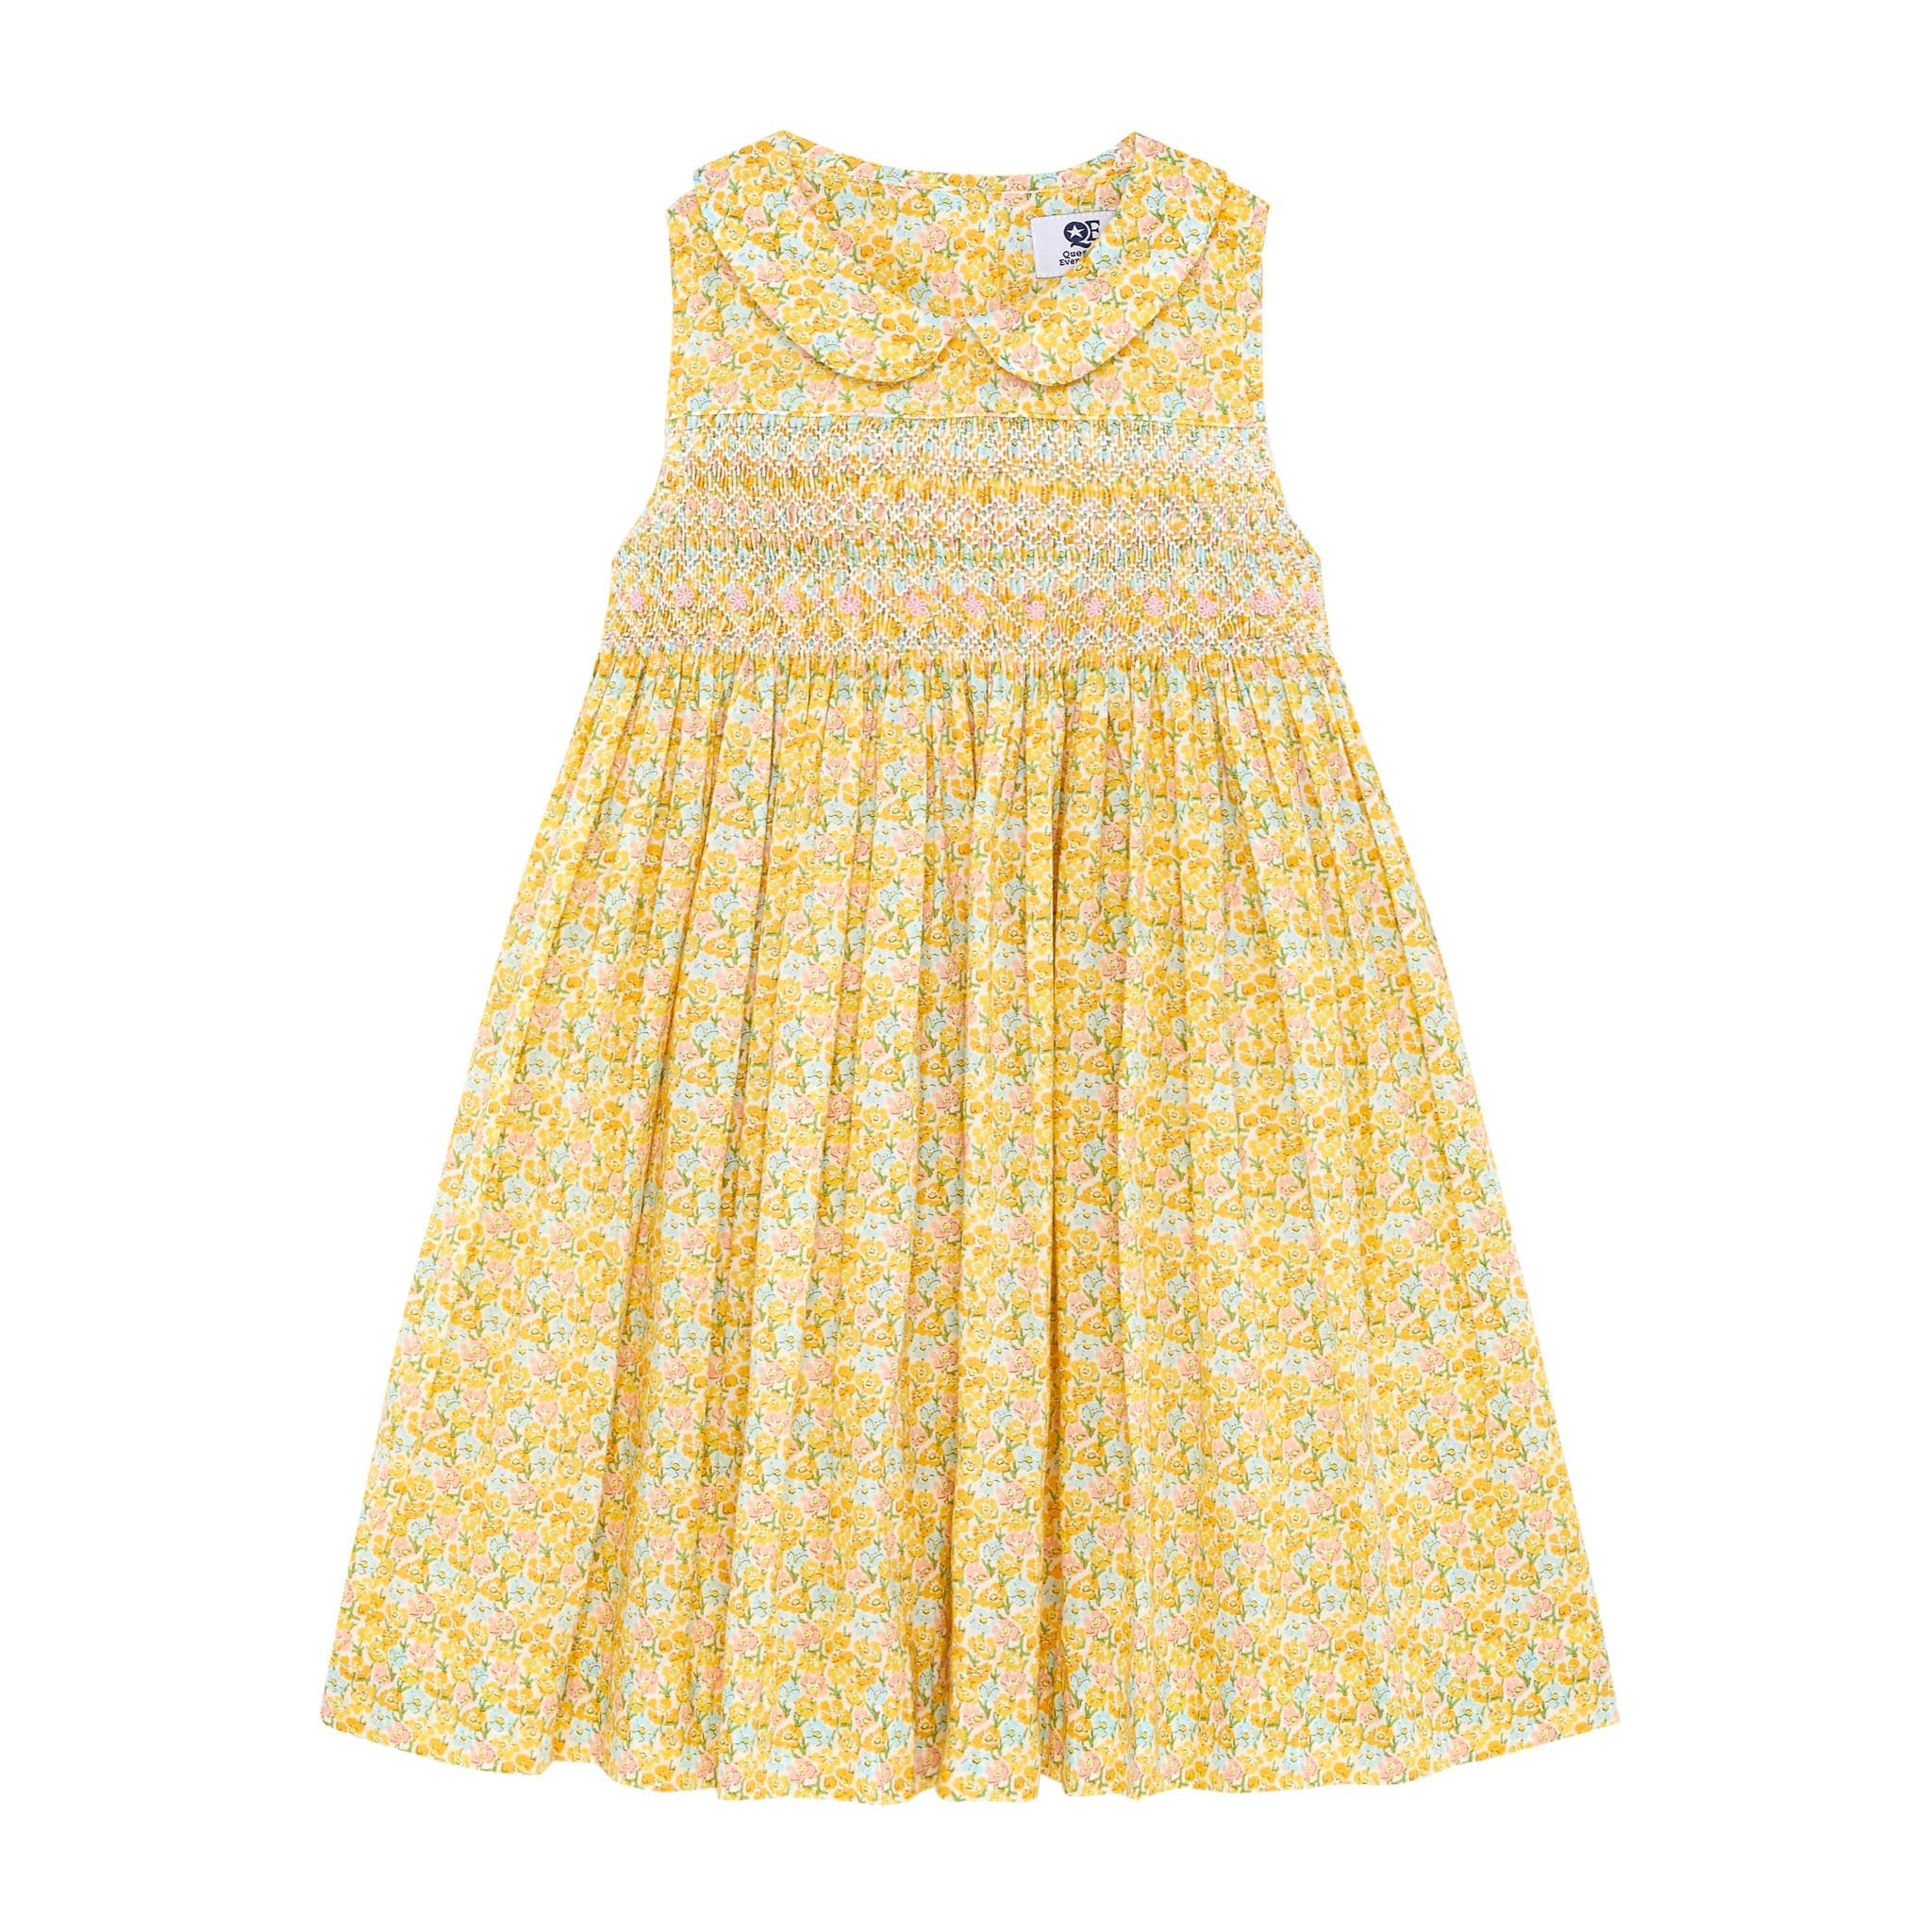 hand-smocked yellow Easter Dress, sleeveless, front